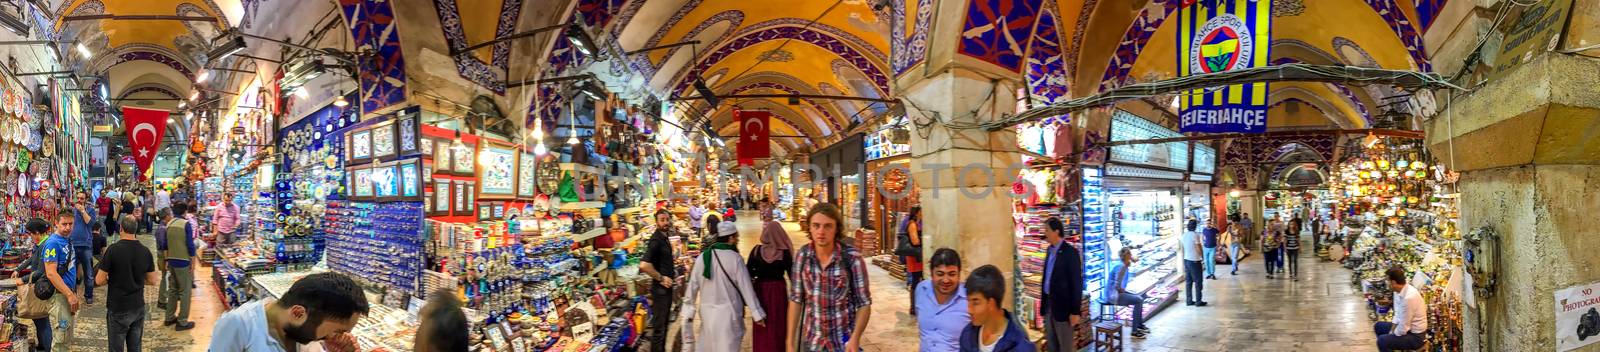 ISTANBUL - SEPTEMBER 22, 2014: Blurred movements of tourists and locals in Grand Bazaar. It's one of the largest and oldest covered markets in the world, with 61 covered streets and over 3,000 shops